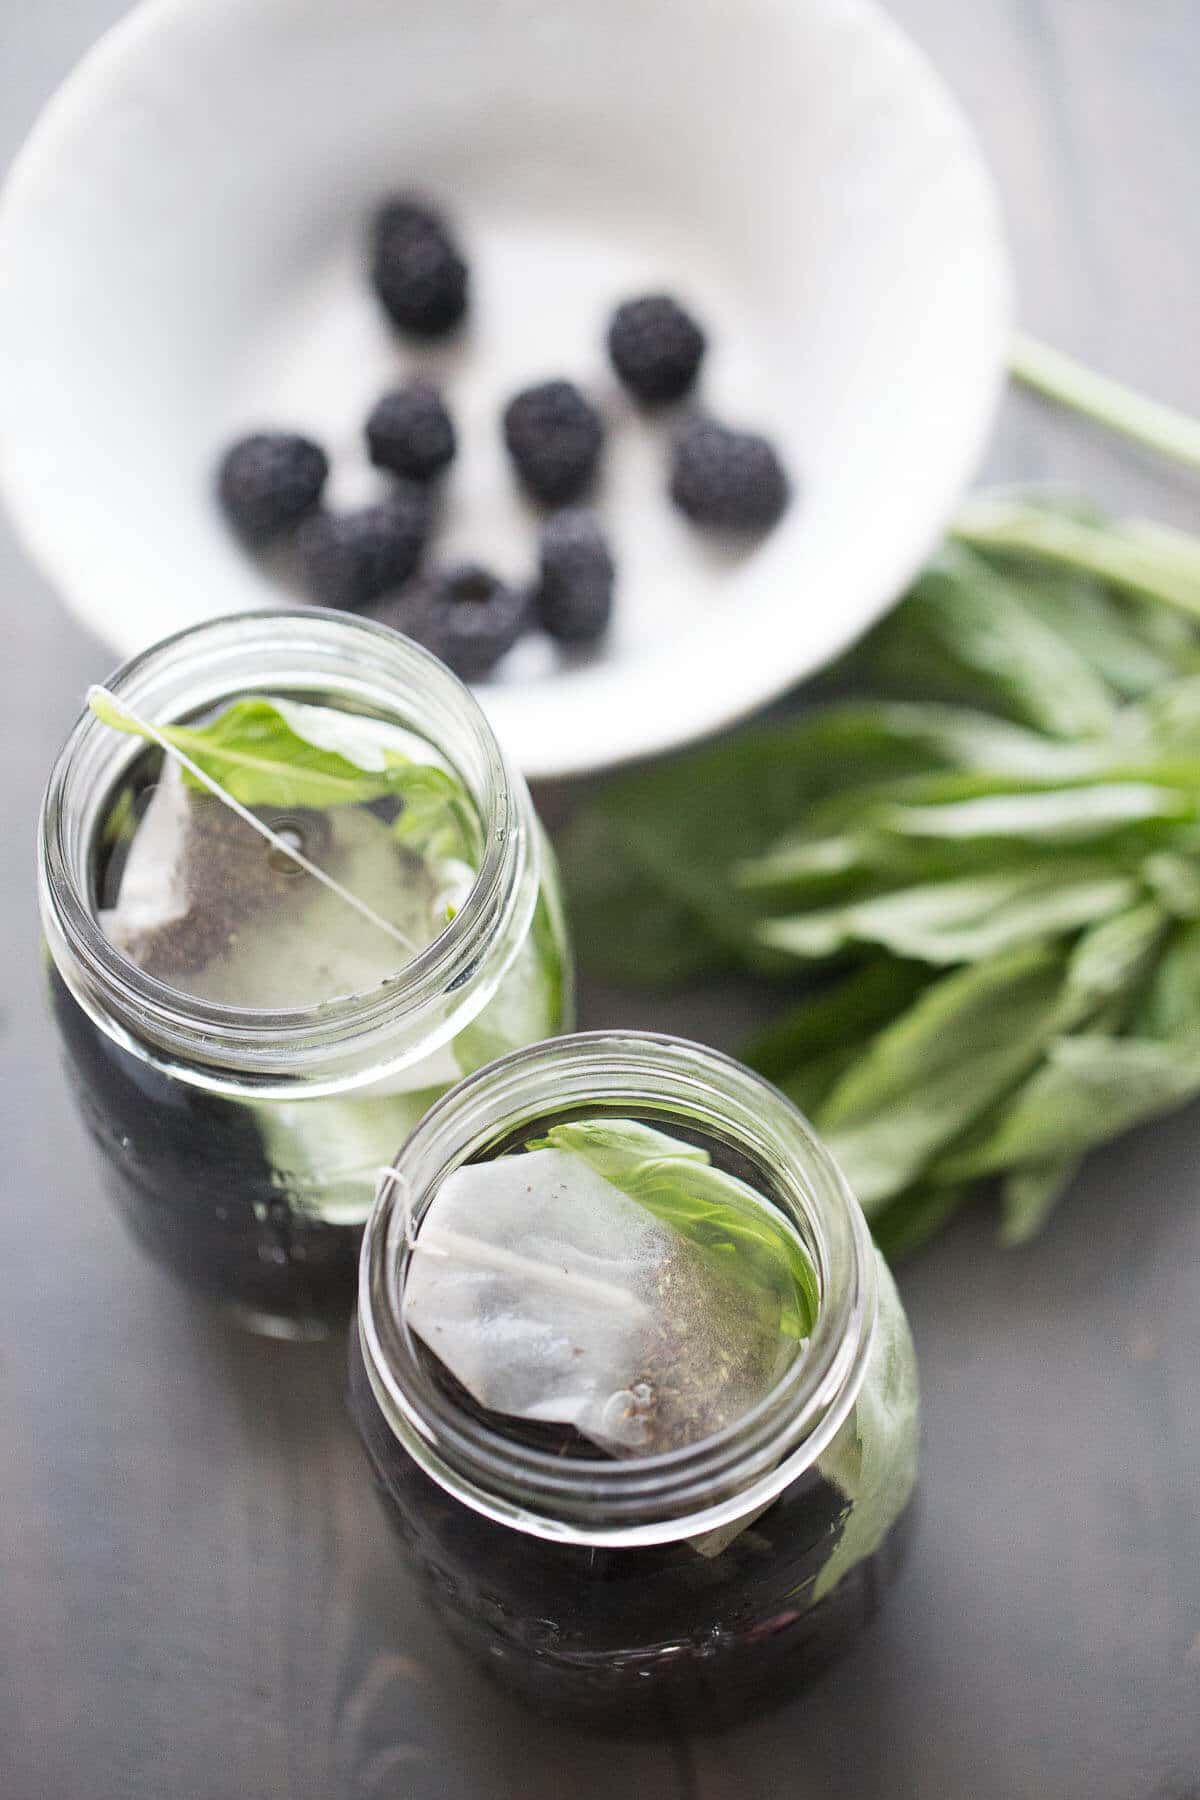 Two glass jars with tea bags and basil leaves next to a white bowl of blackberries on a wooden table.